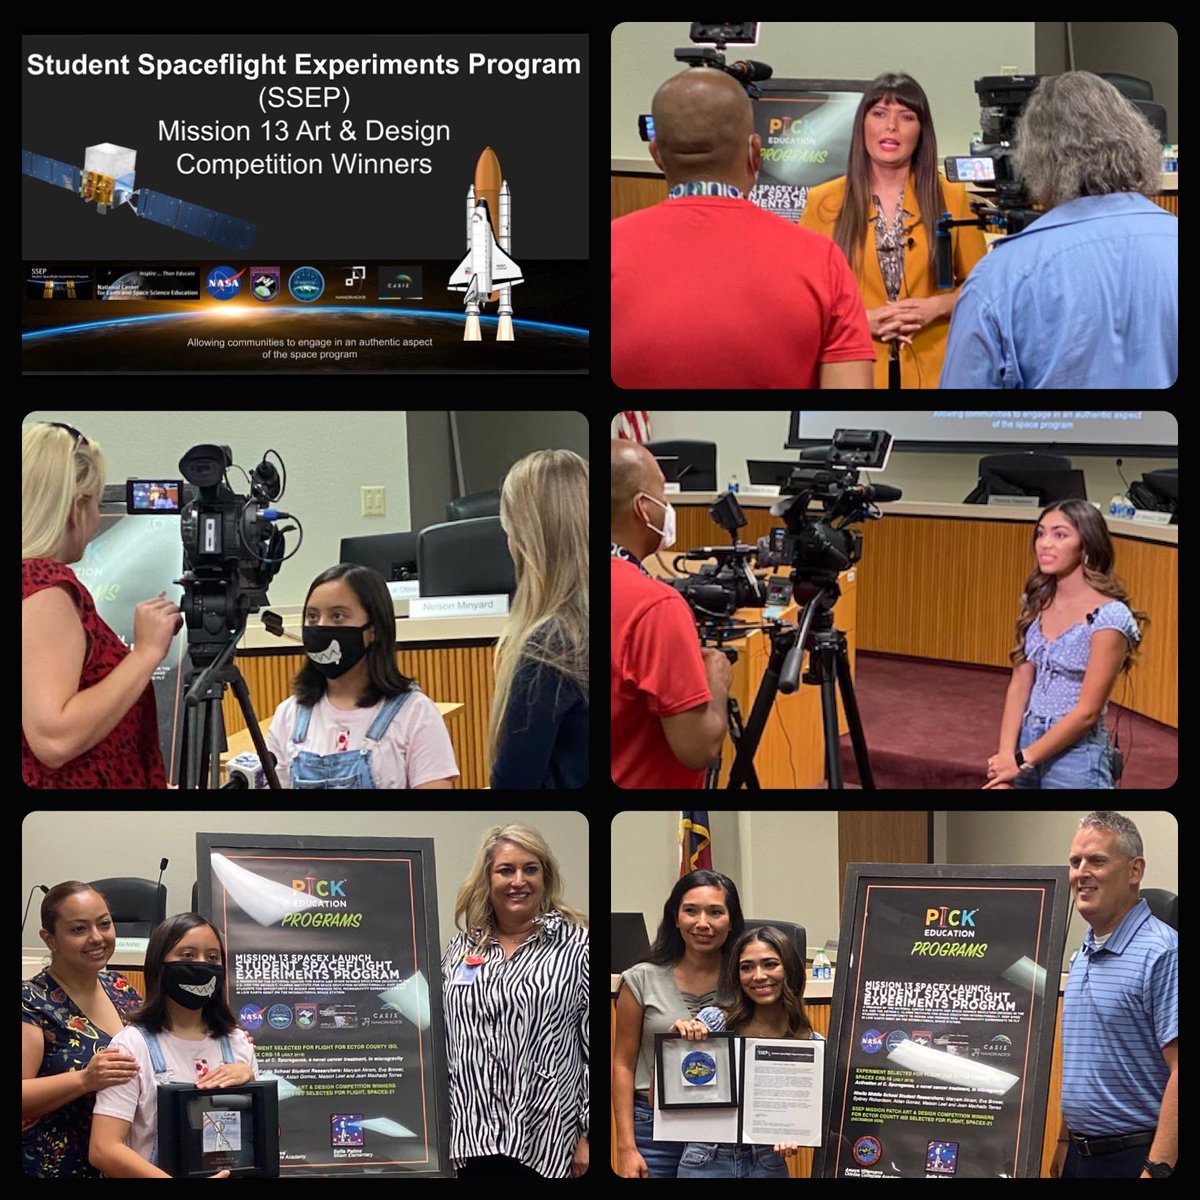 #ECISD Press Conference #SSEPMission13 #Art & #Design #Competition  2 #Certified Patches return home embossed “Flown in Space by #Nanoracks”  aboard #SpaceX21 #Falcon9 #Dragonspacecraft  💫 🚀 💫 #WINNERS 21,201 submissions across #38communities #ecisdLEADS #ReachingForTheStars